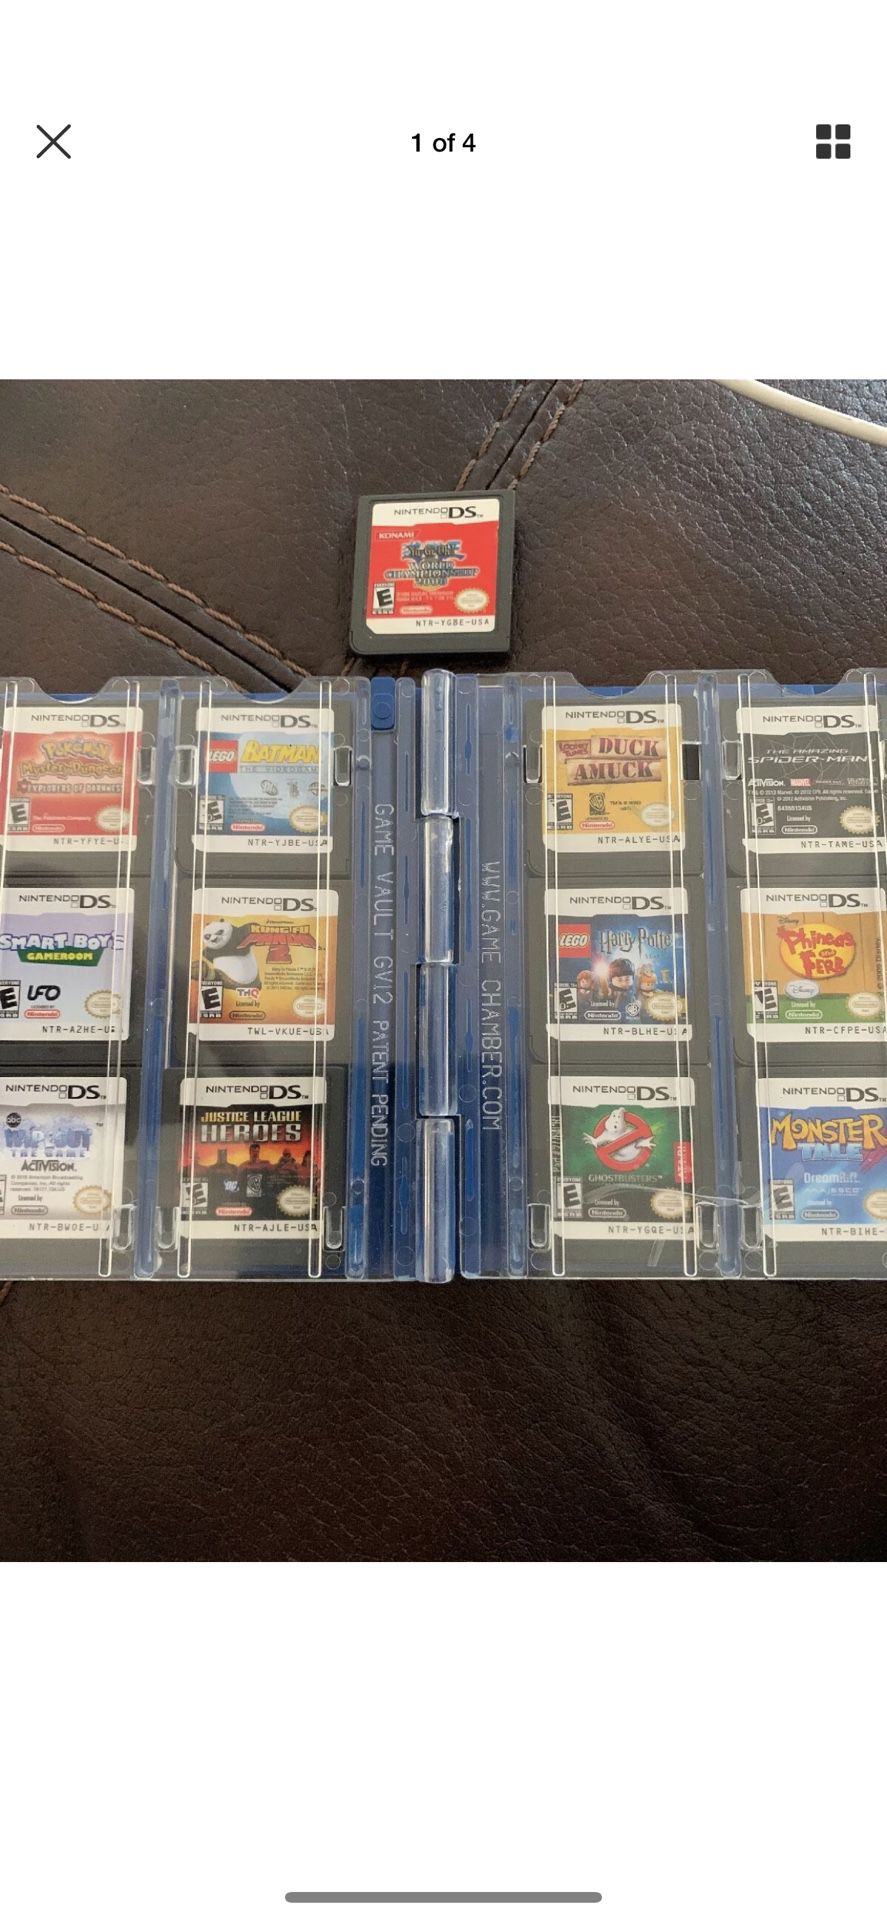 Nintendo DS Game Lot - $49